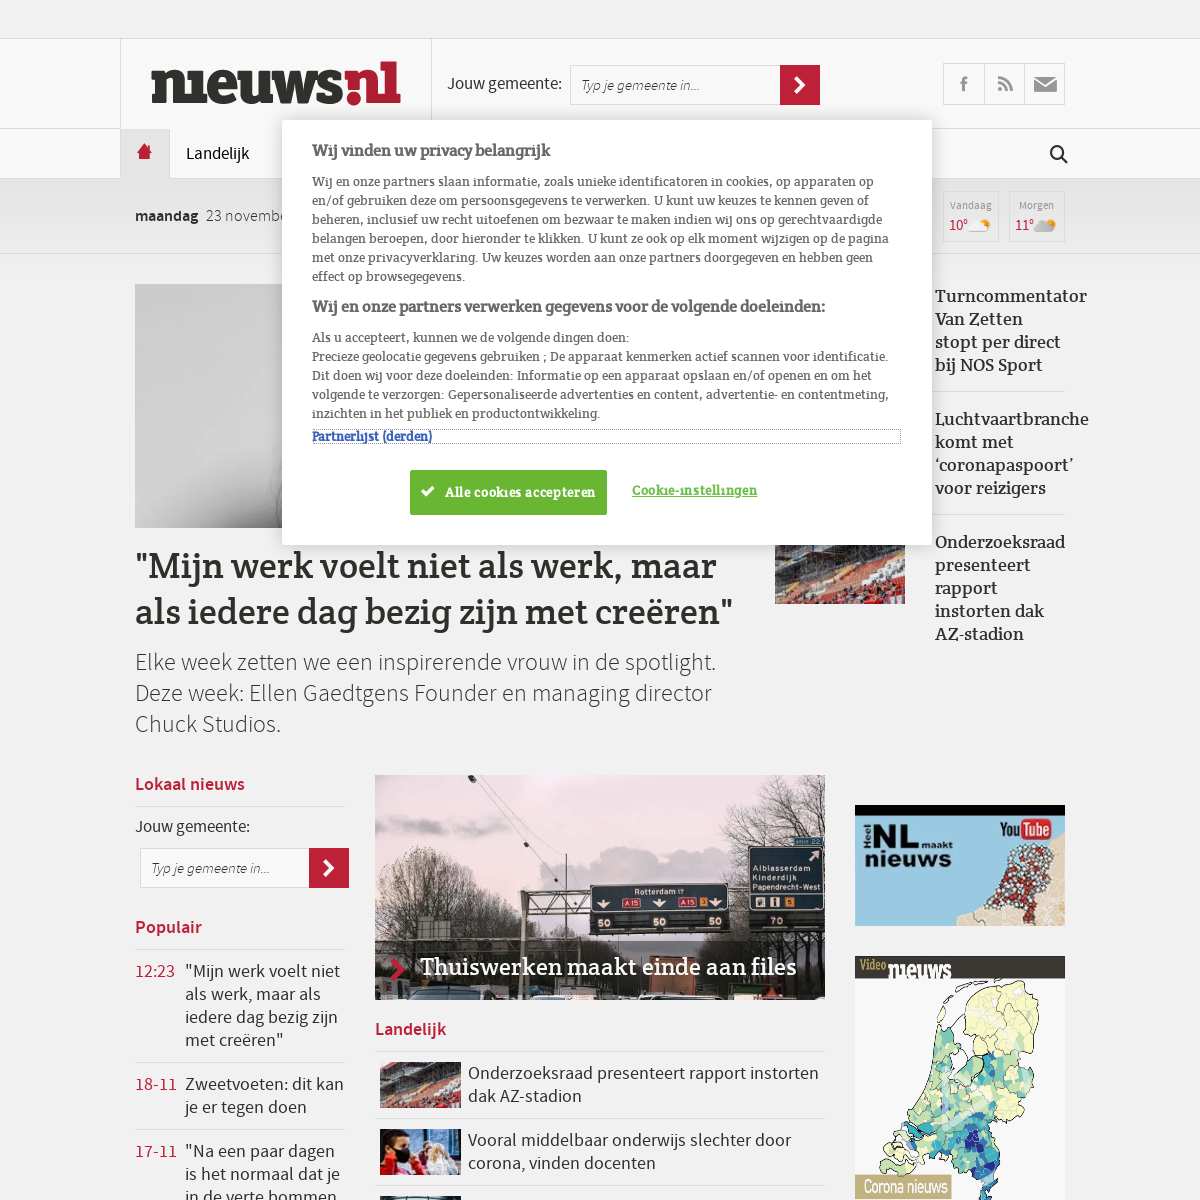 A complete backup of nieuws.nl